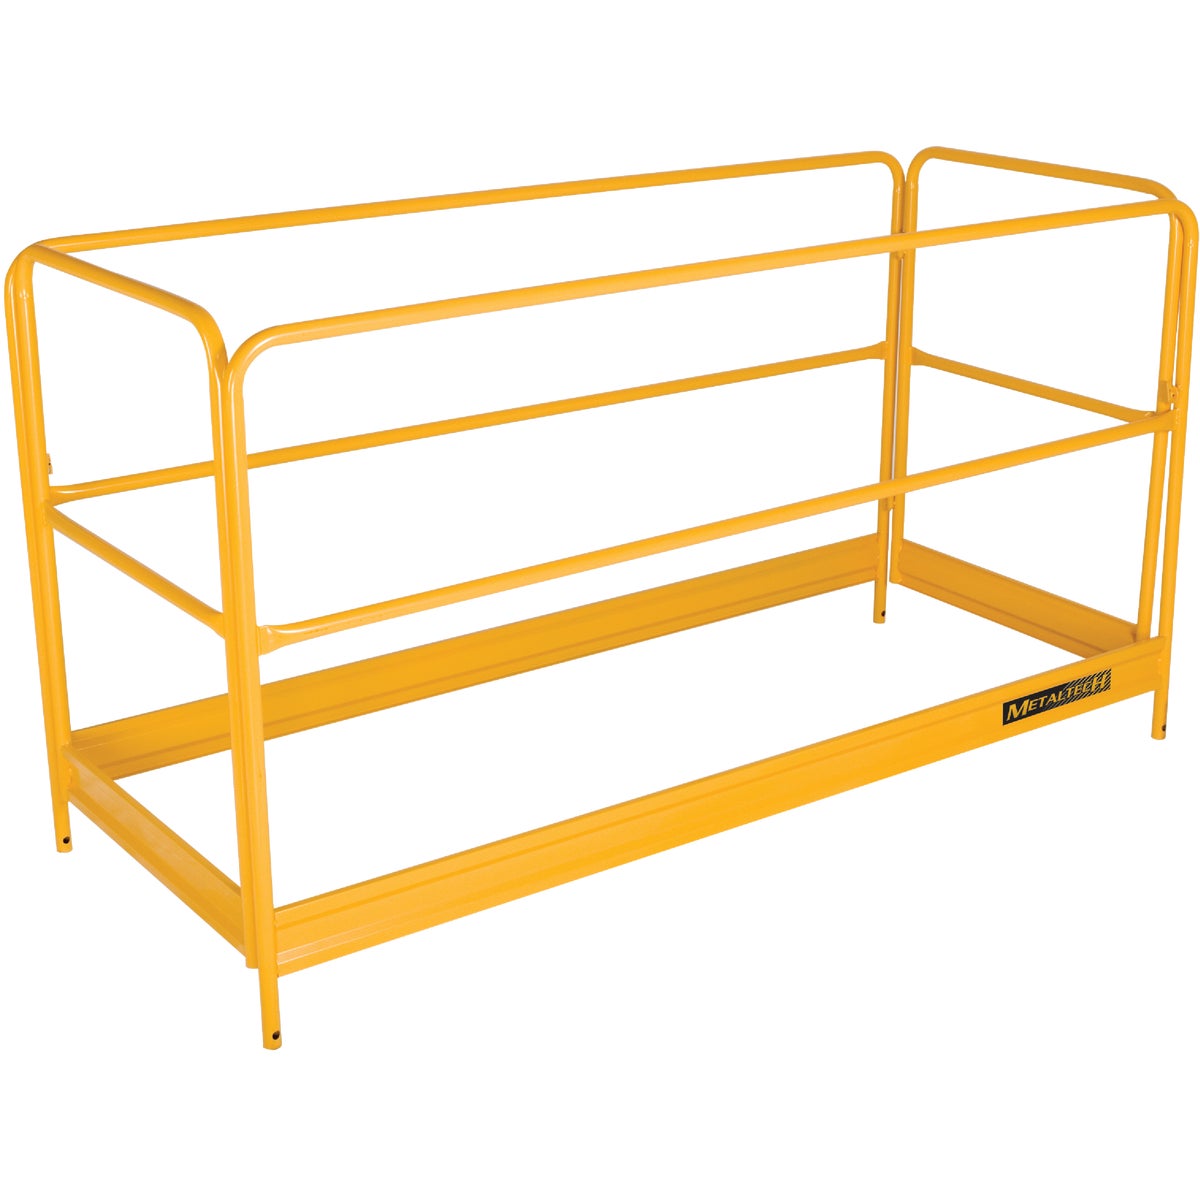 Item 777849, MetalTech designed this rugged steel guardrail set to provide extra safety 